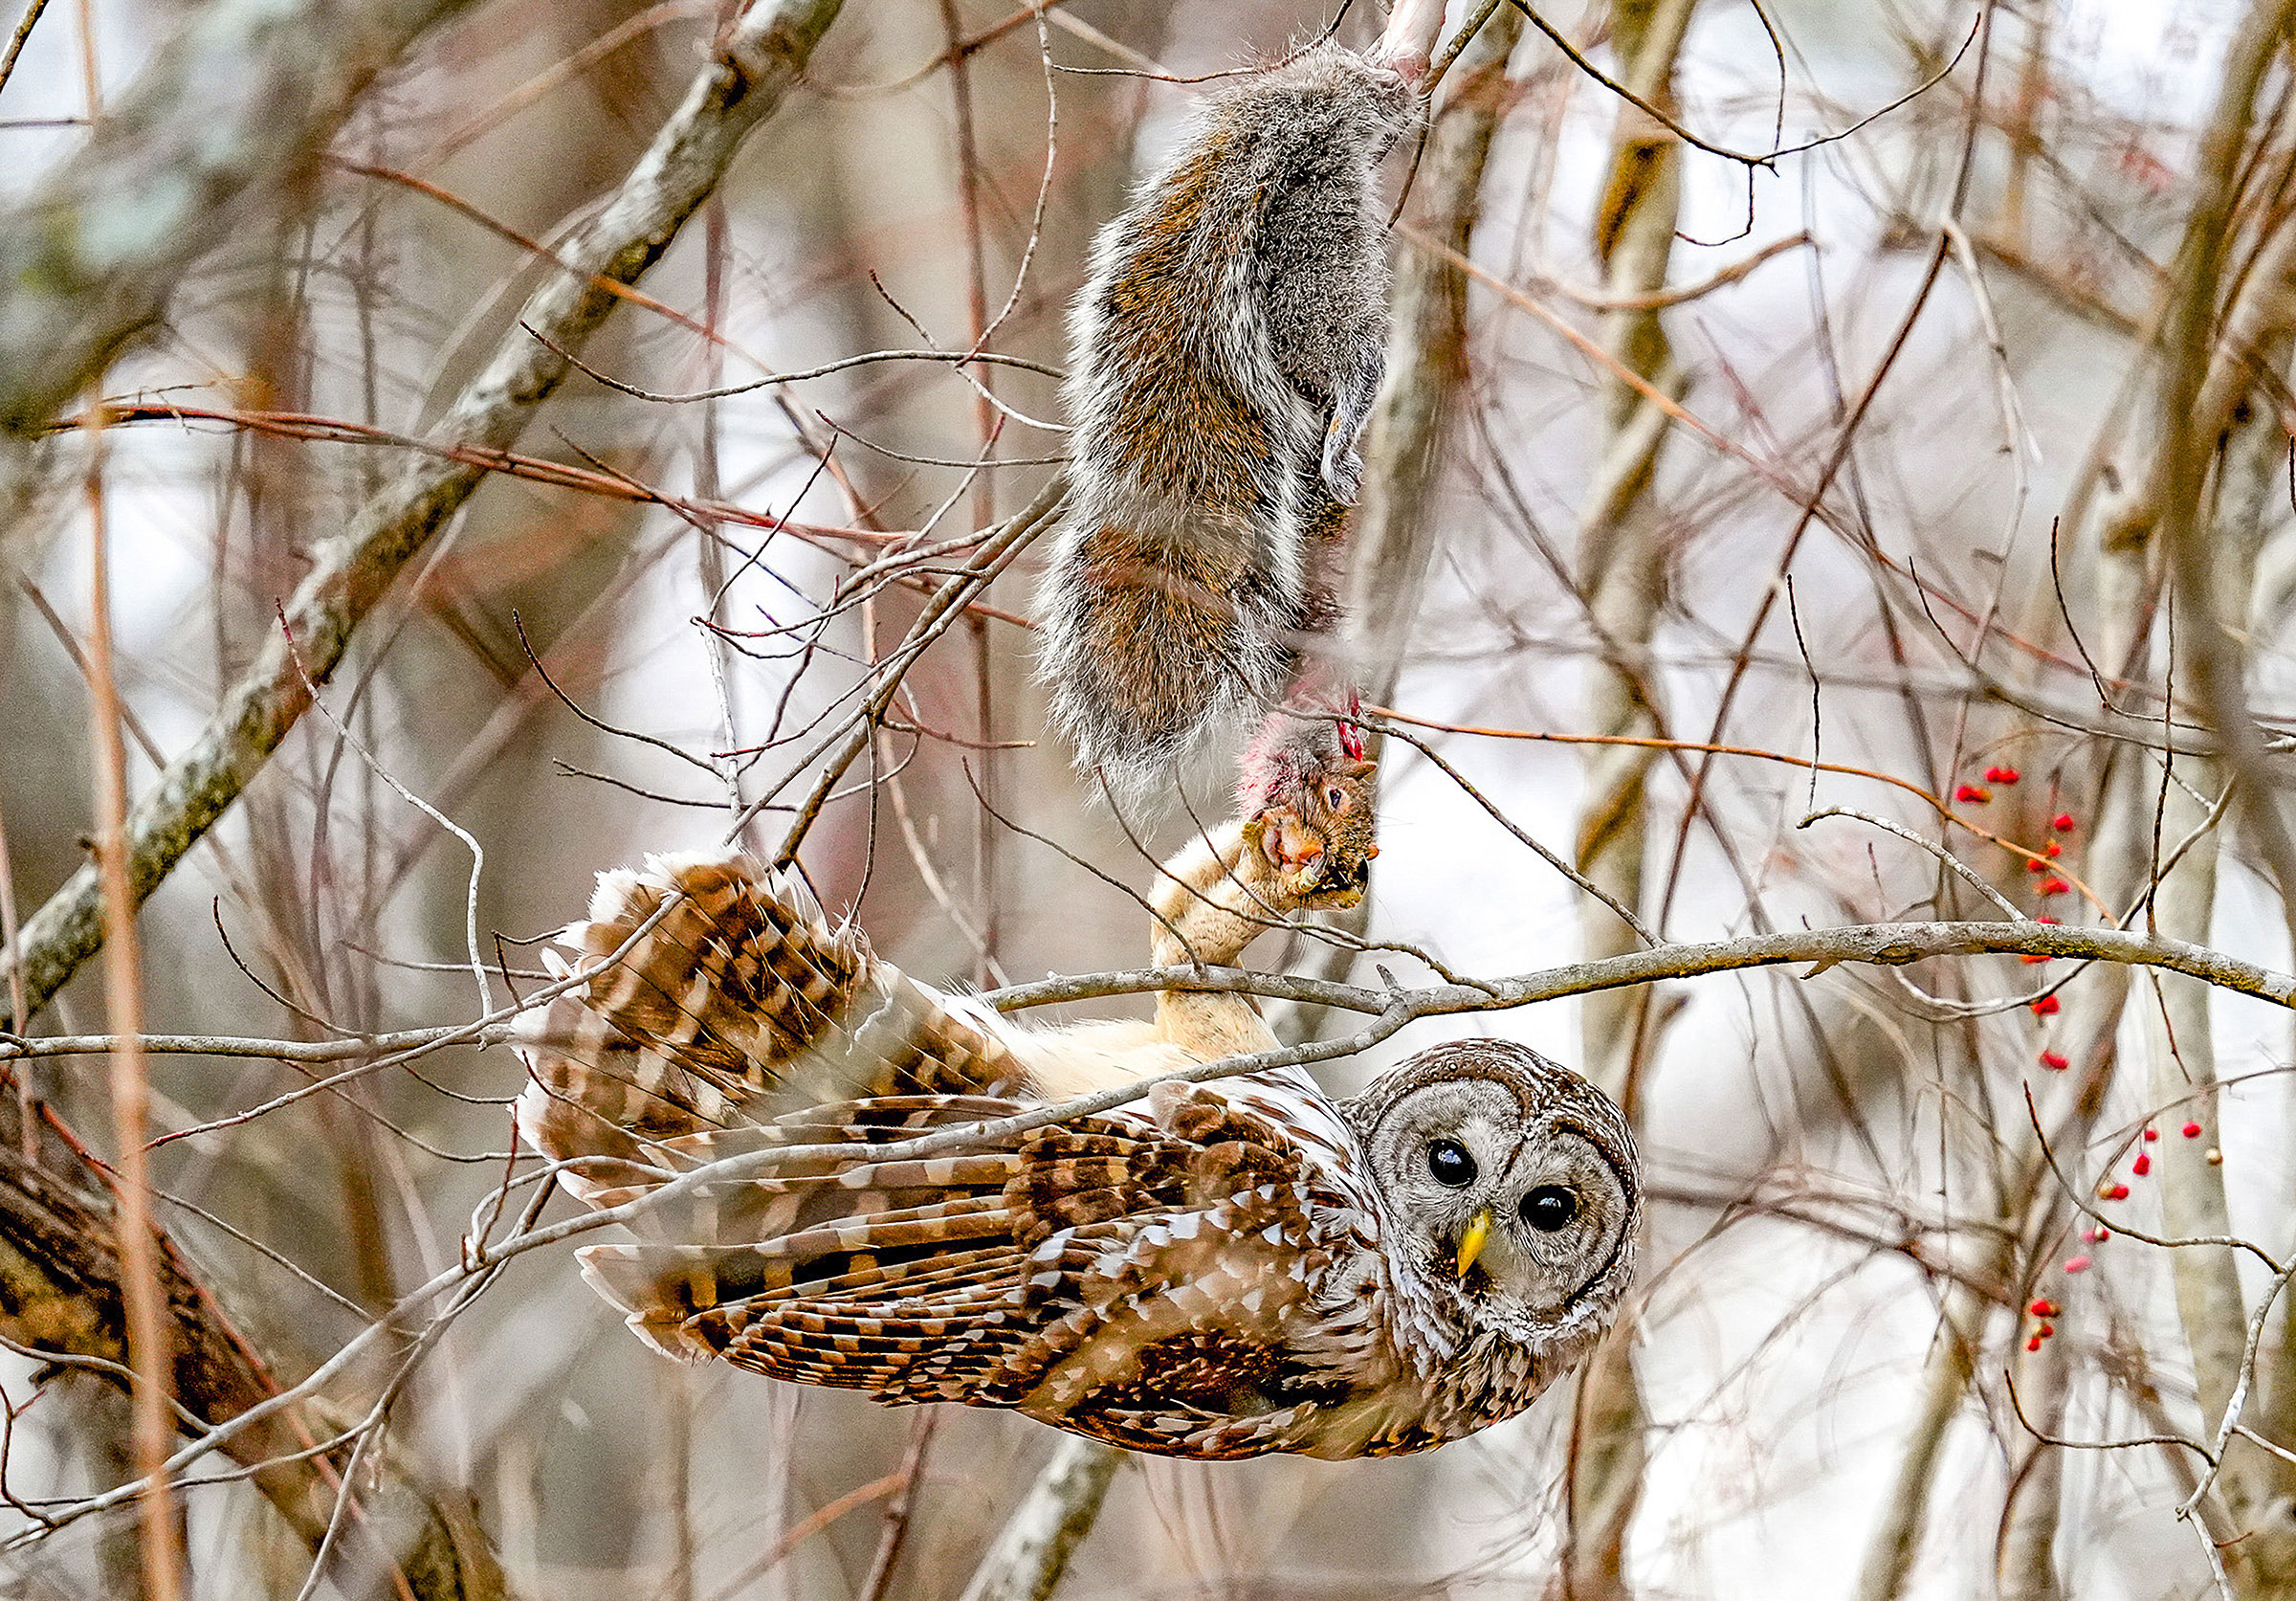 A Barred Owl hangs upside down from a thin tree branch, its body horizontal, its face turned and looking at the camera. Above it hangs a squirrel on a branch. Its head is nearly completely severed and is held in the owl’s talons. Its fur is bloodied.